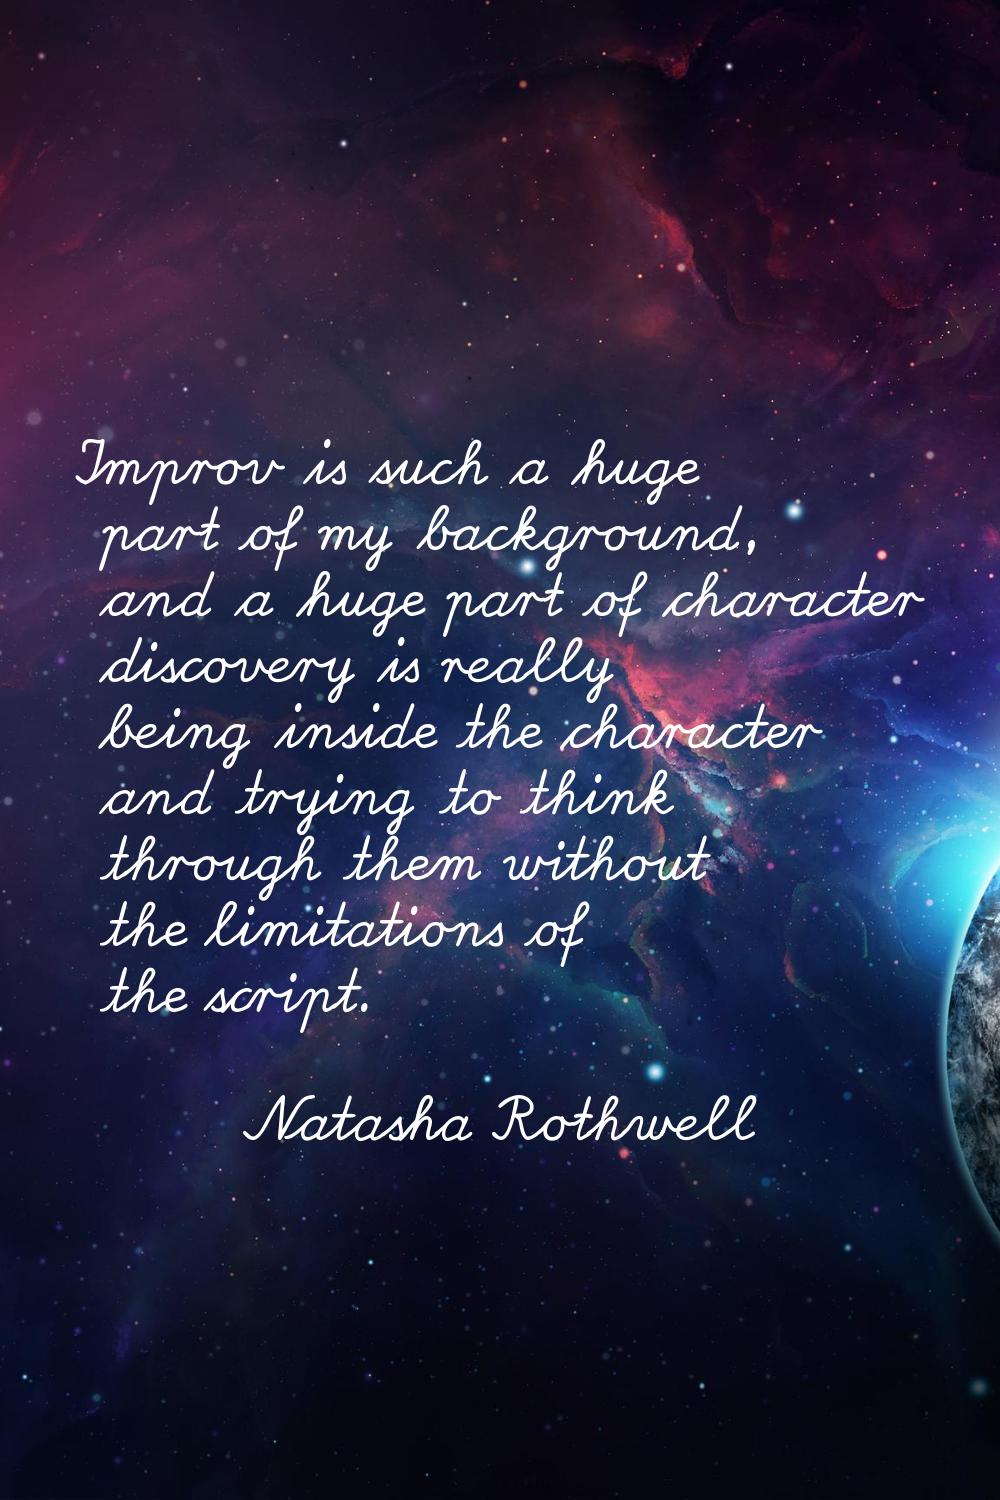 Improv is such a huge part of my background, and a huge part of character discovery is really being